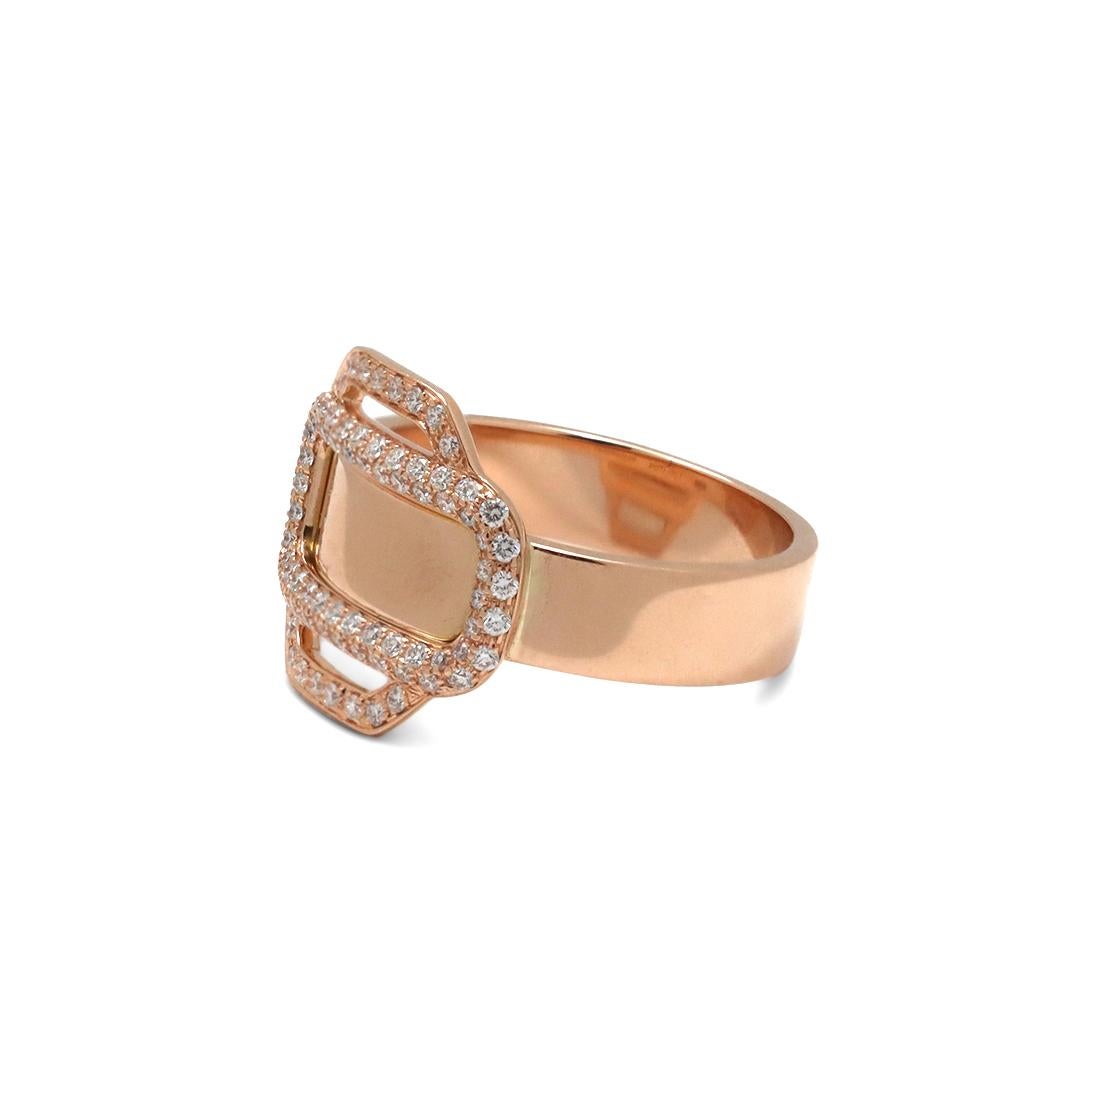 Authentic Hermès 'Attelage D'Or' ring crafted in 18 karat rose gold and pave set with approximately 0.35 carats of high-quality diamonds. Designed by Pierre Hardy, the reimagined carriage buckle motif is a callback to the house's origins. The buckle